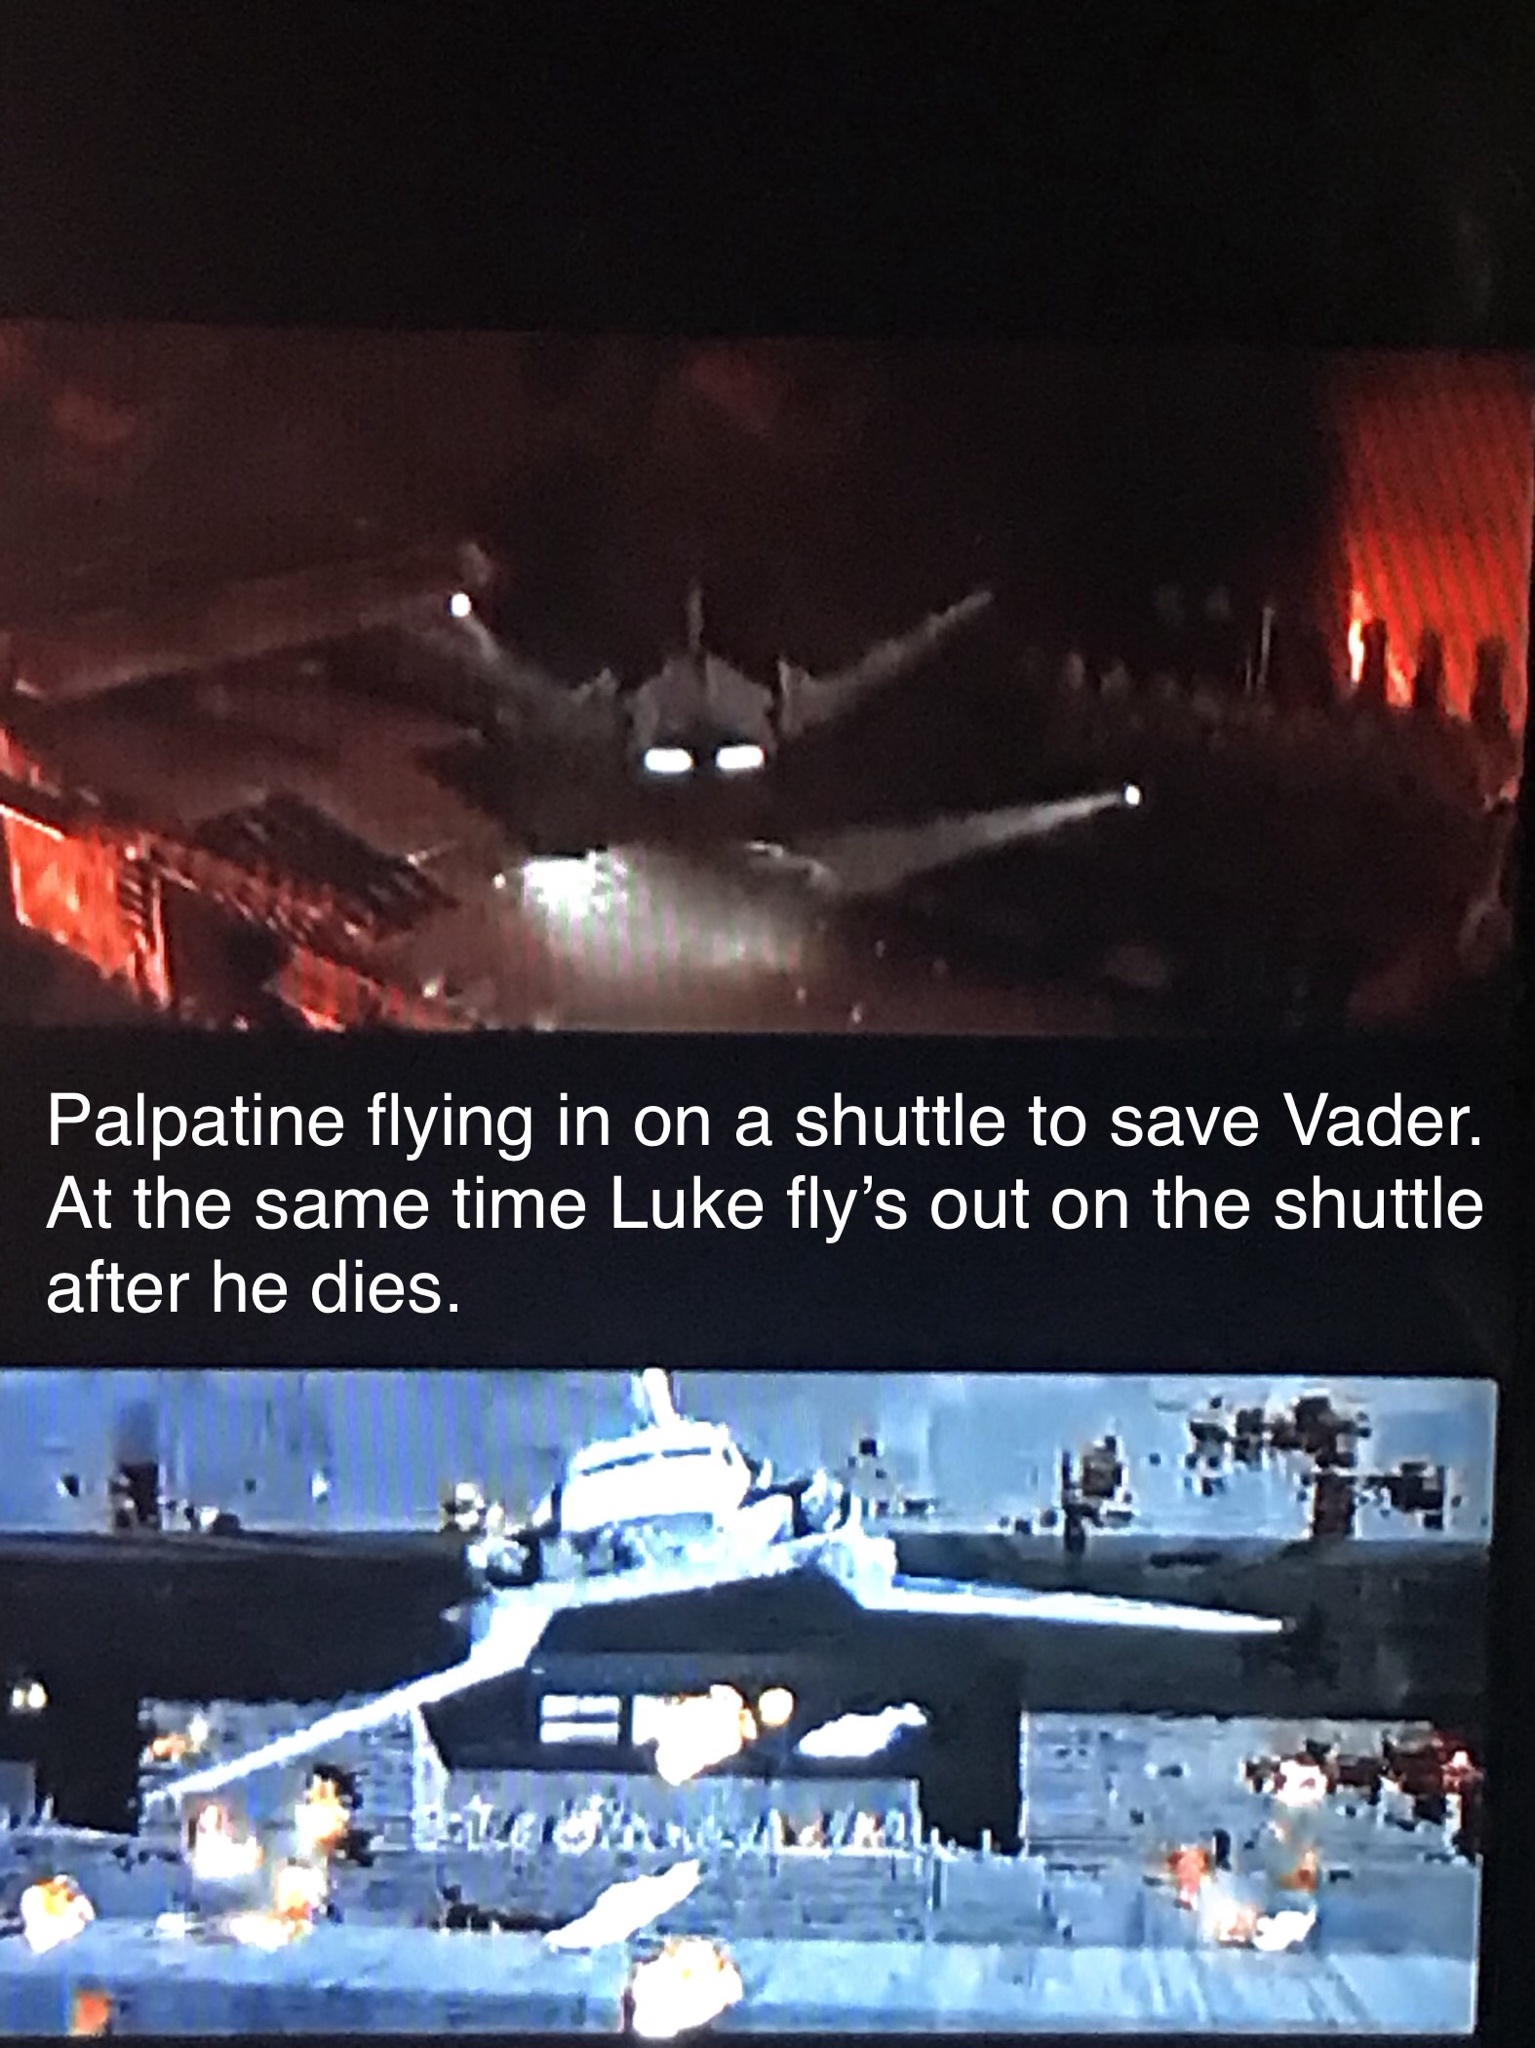 computer wallpaper - Palpatine flying in on a shuttle to save Vader. At the same time Luke fly's out on the shuttle, after he dies.